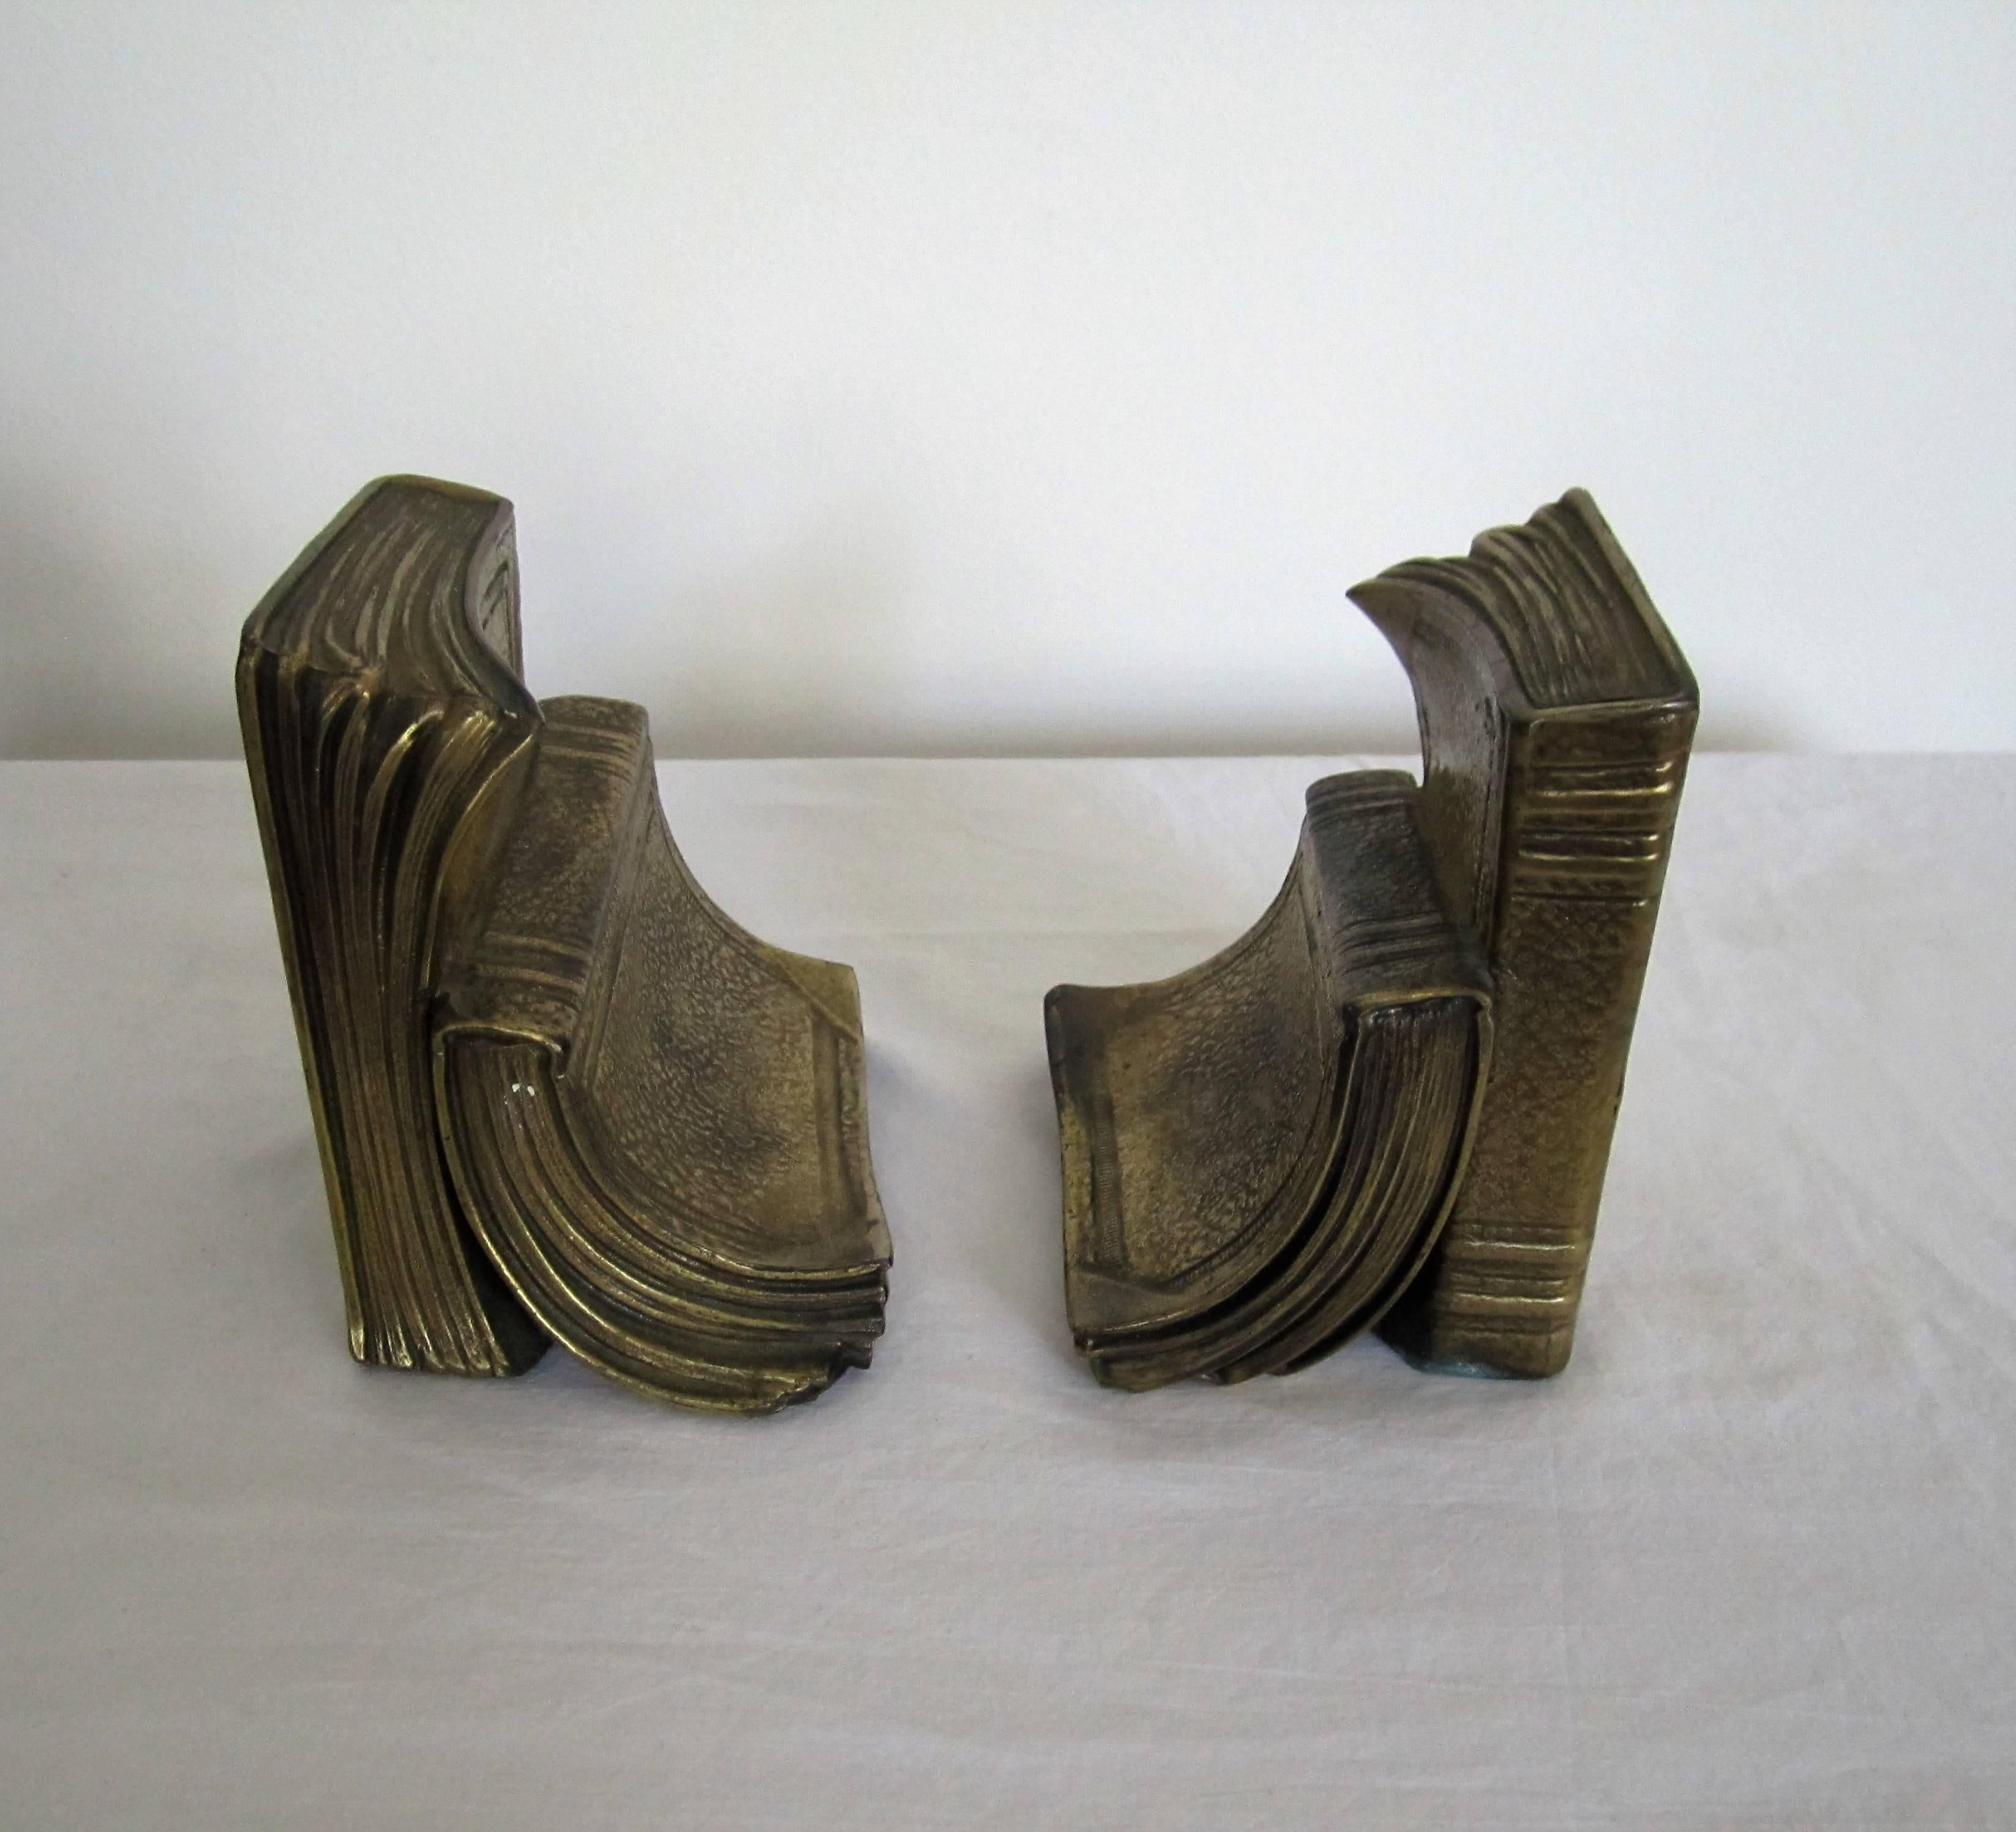 Pair/Set Available here for $95 on Sale.

A pair of vintage 'book' bookends in a brass plated metal. With maker's mark and marked 'Made in USA' as show in images. Each 4.5 in. H. 